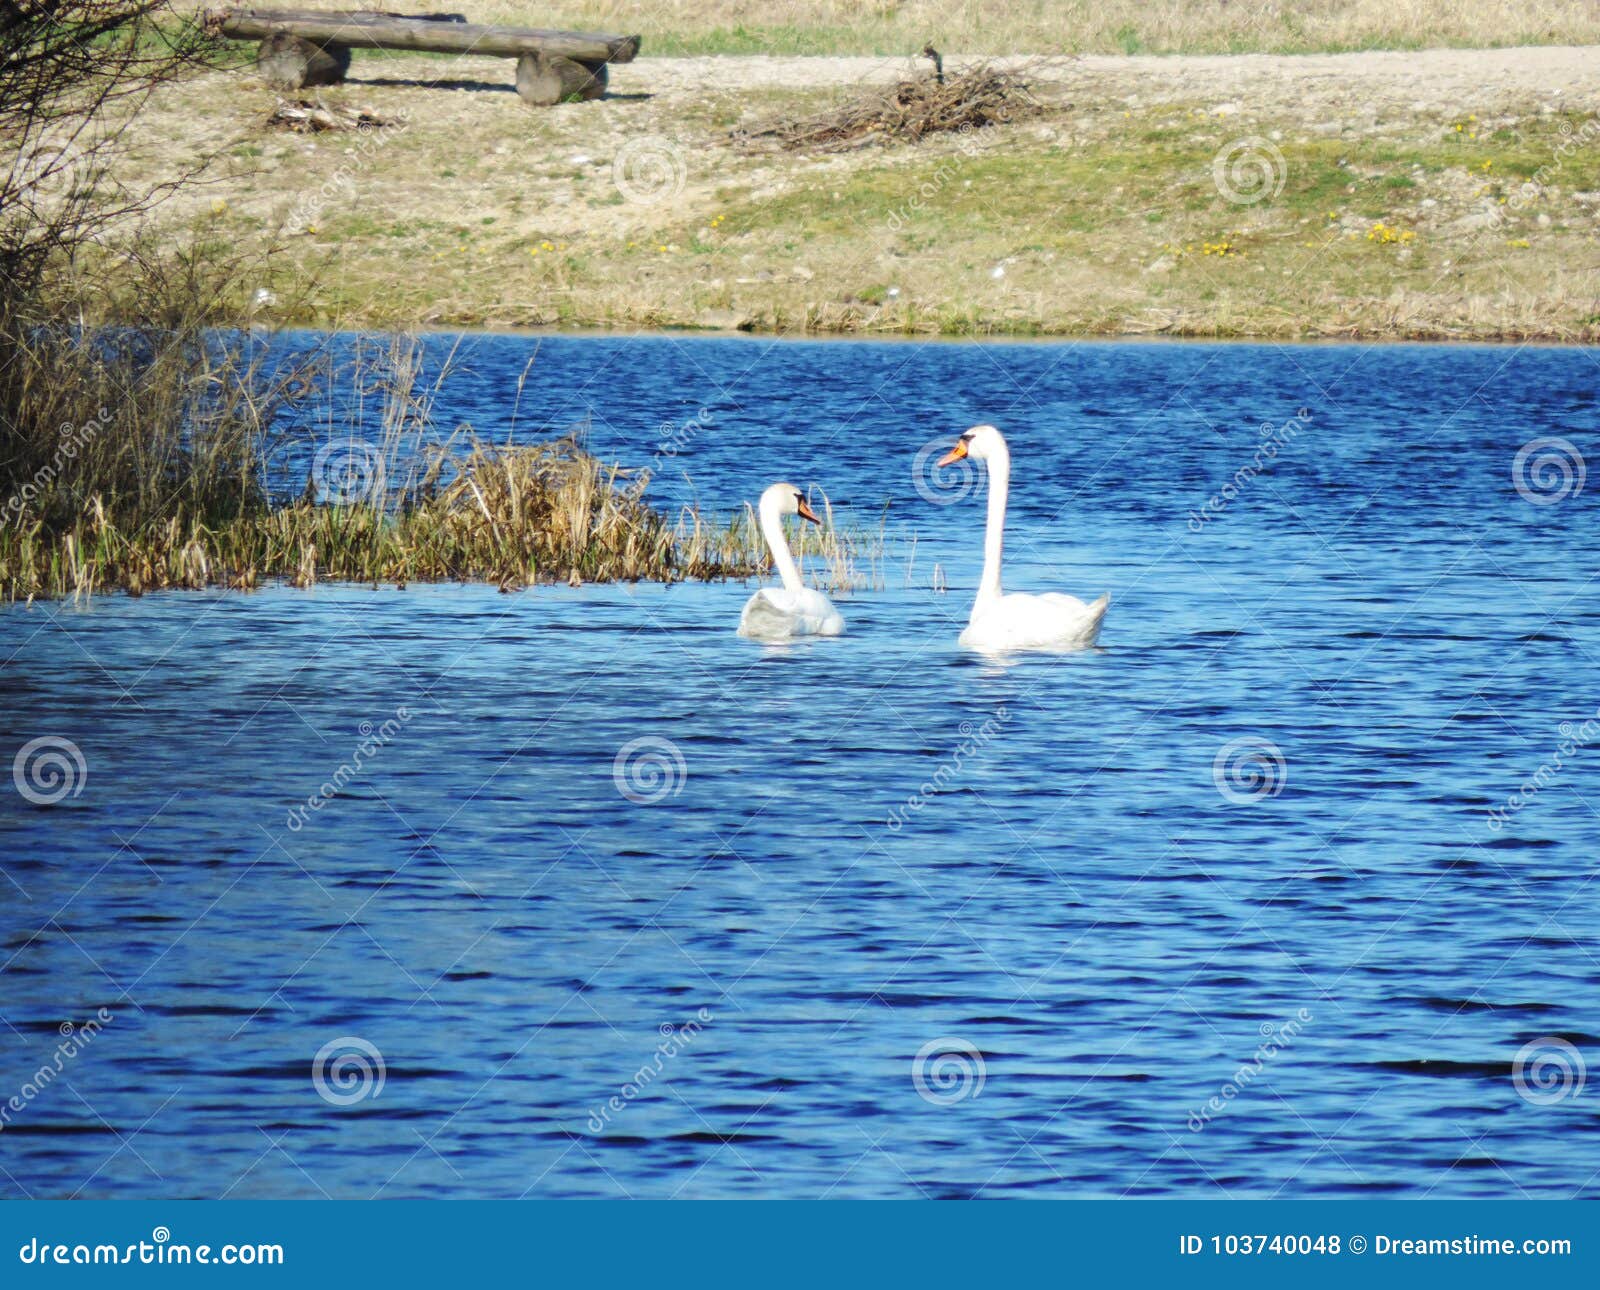 mute swans in the baltic sea